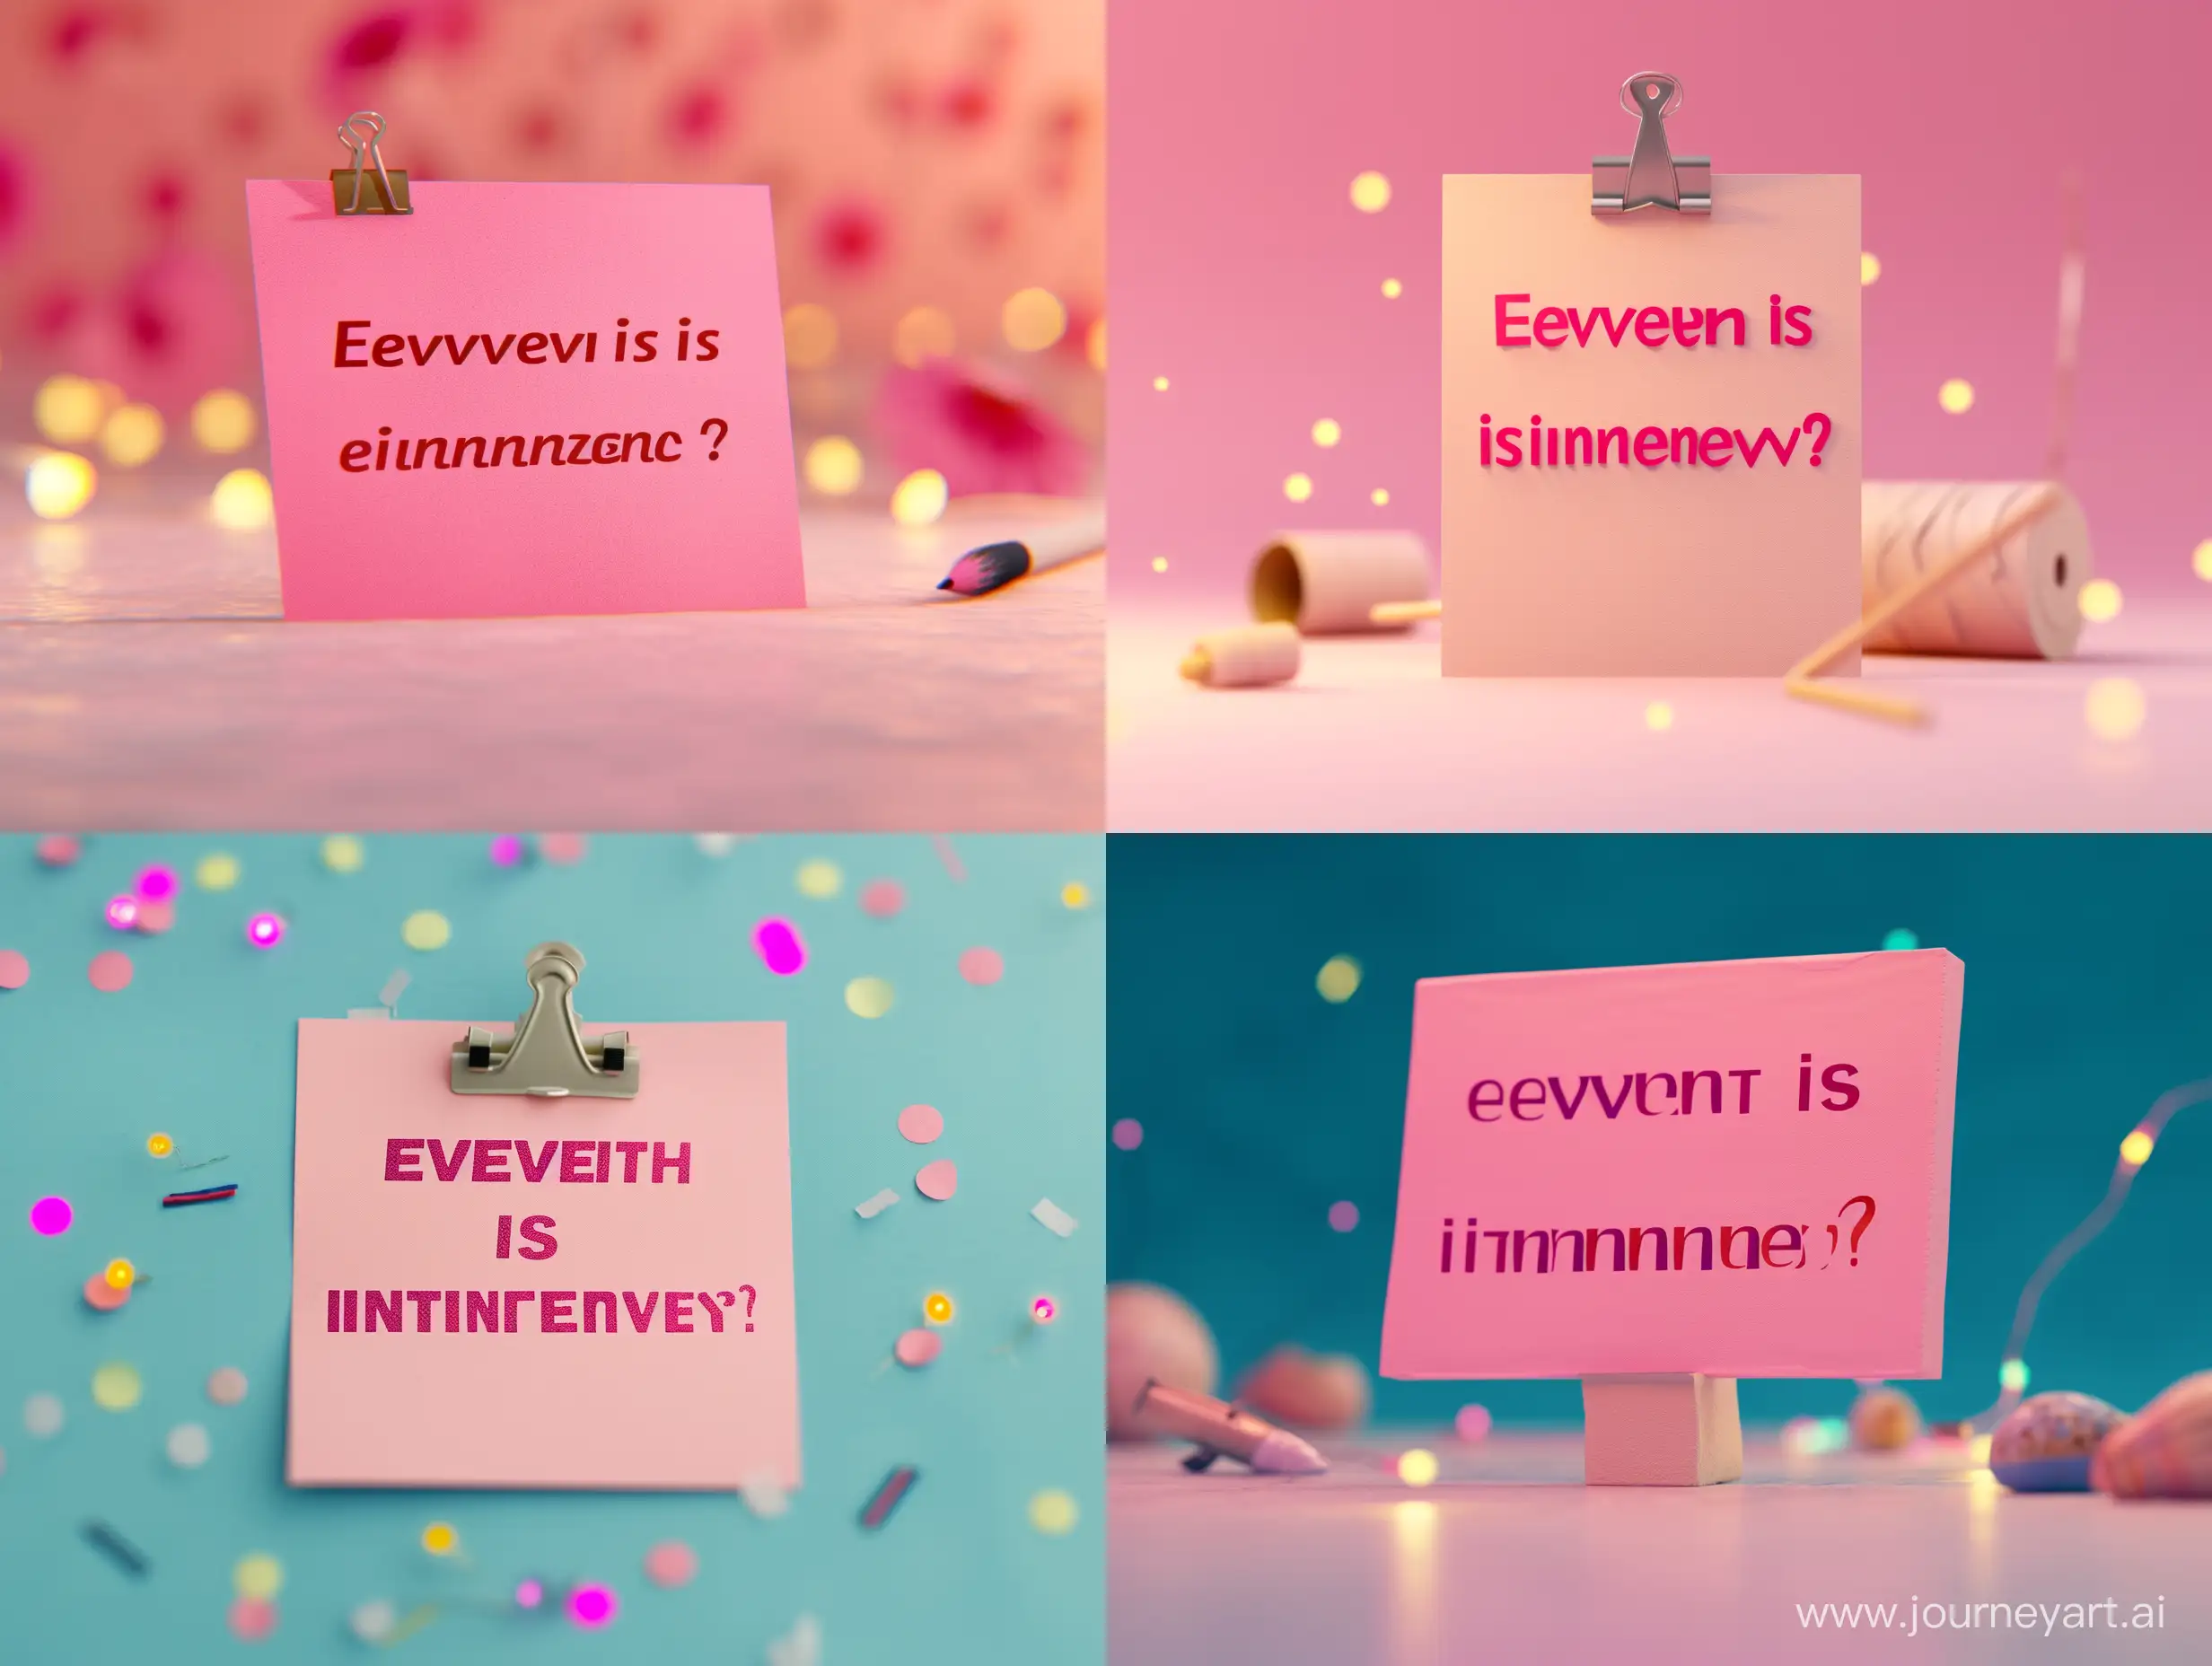 a pink phrase written the following phrase "everything is incredible?", on the post it, realistic, beautiful phrase, lights